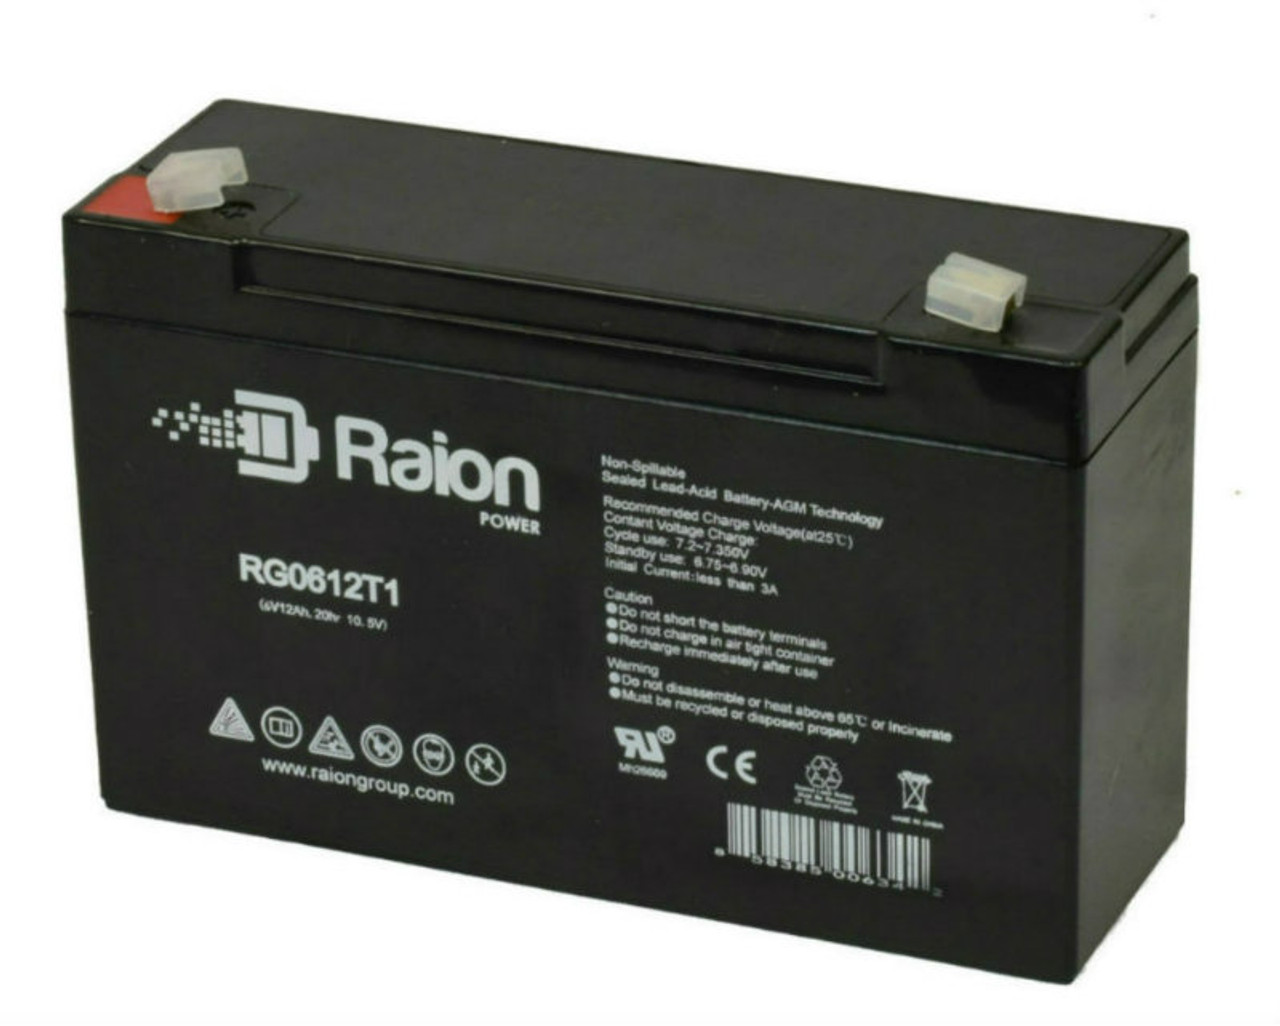 Raion Power RG06120T1 Replacement 6V 12Ah Emergency Light Battery for Sure-Lites 2650